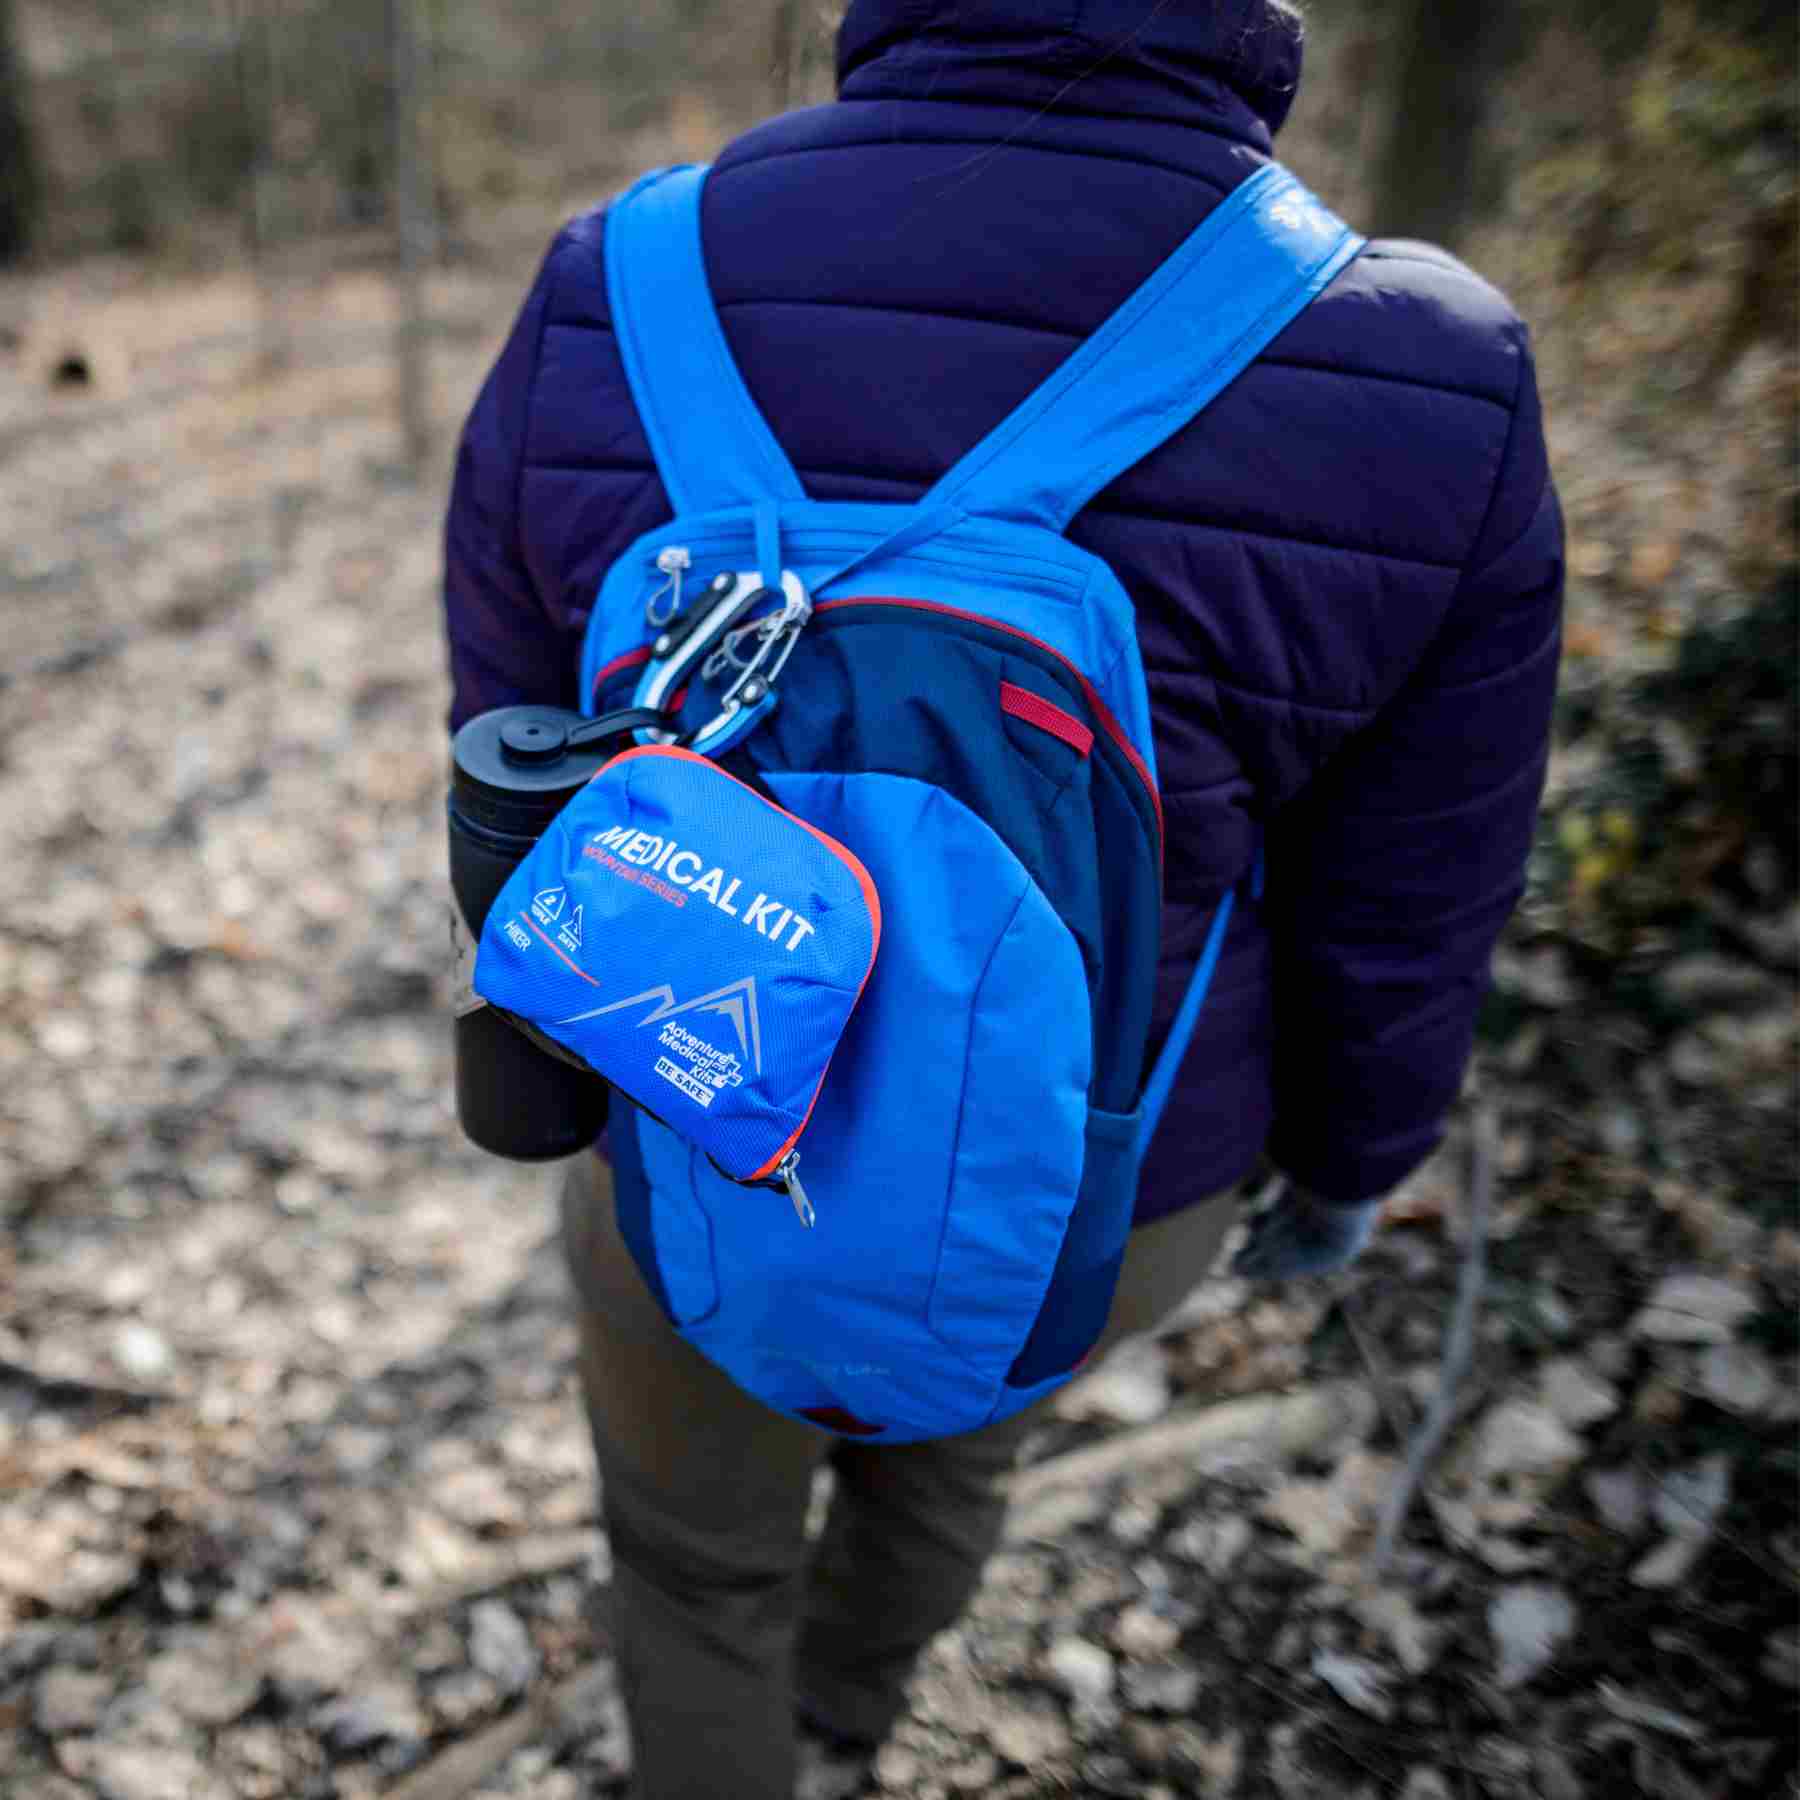 Mountain Series Medical Kit - Hiker kit hanging from blue backpack of person walking